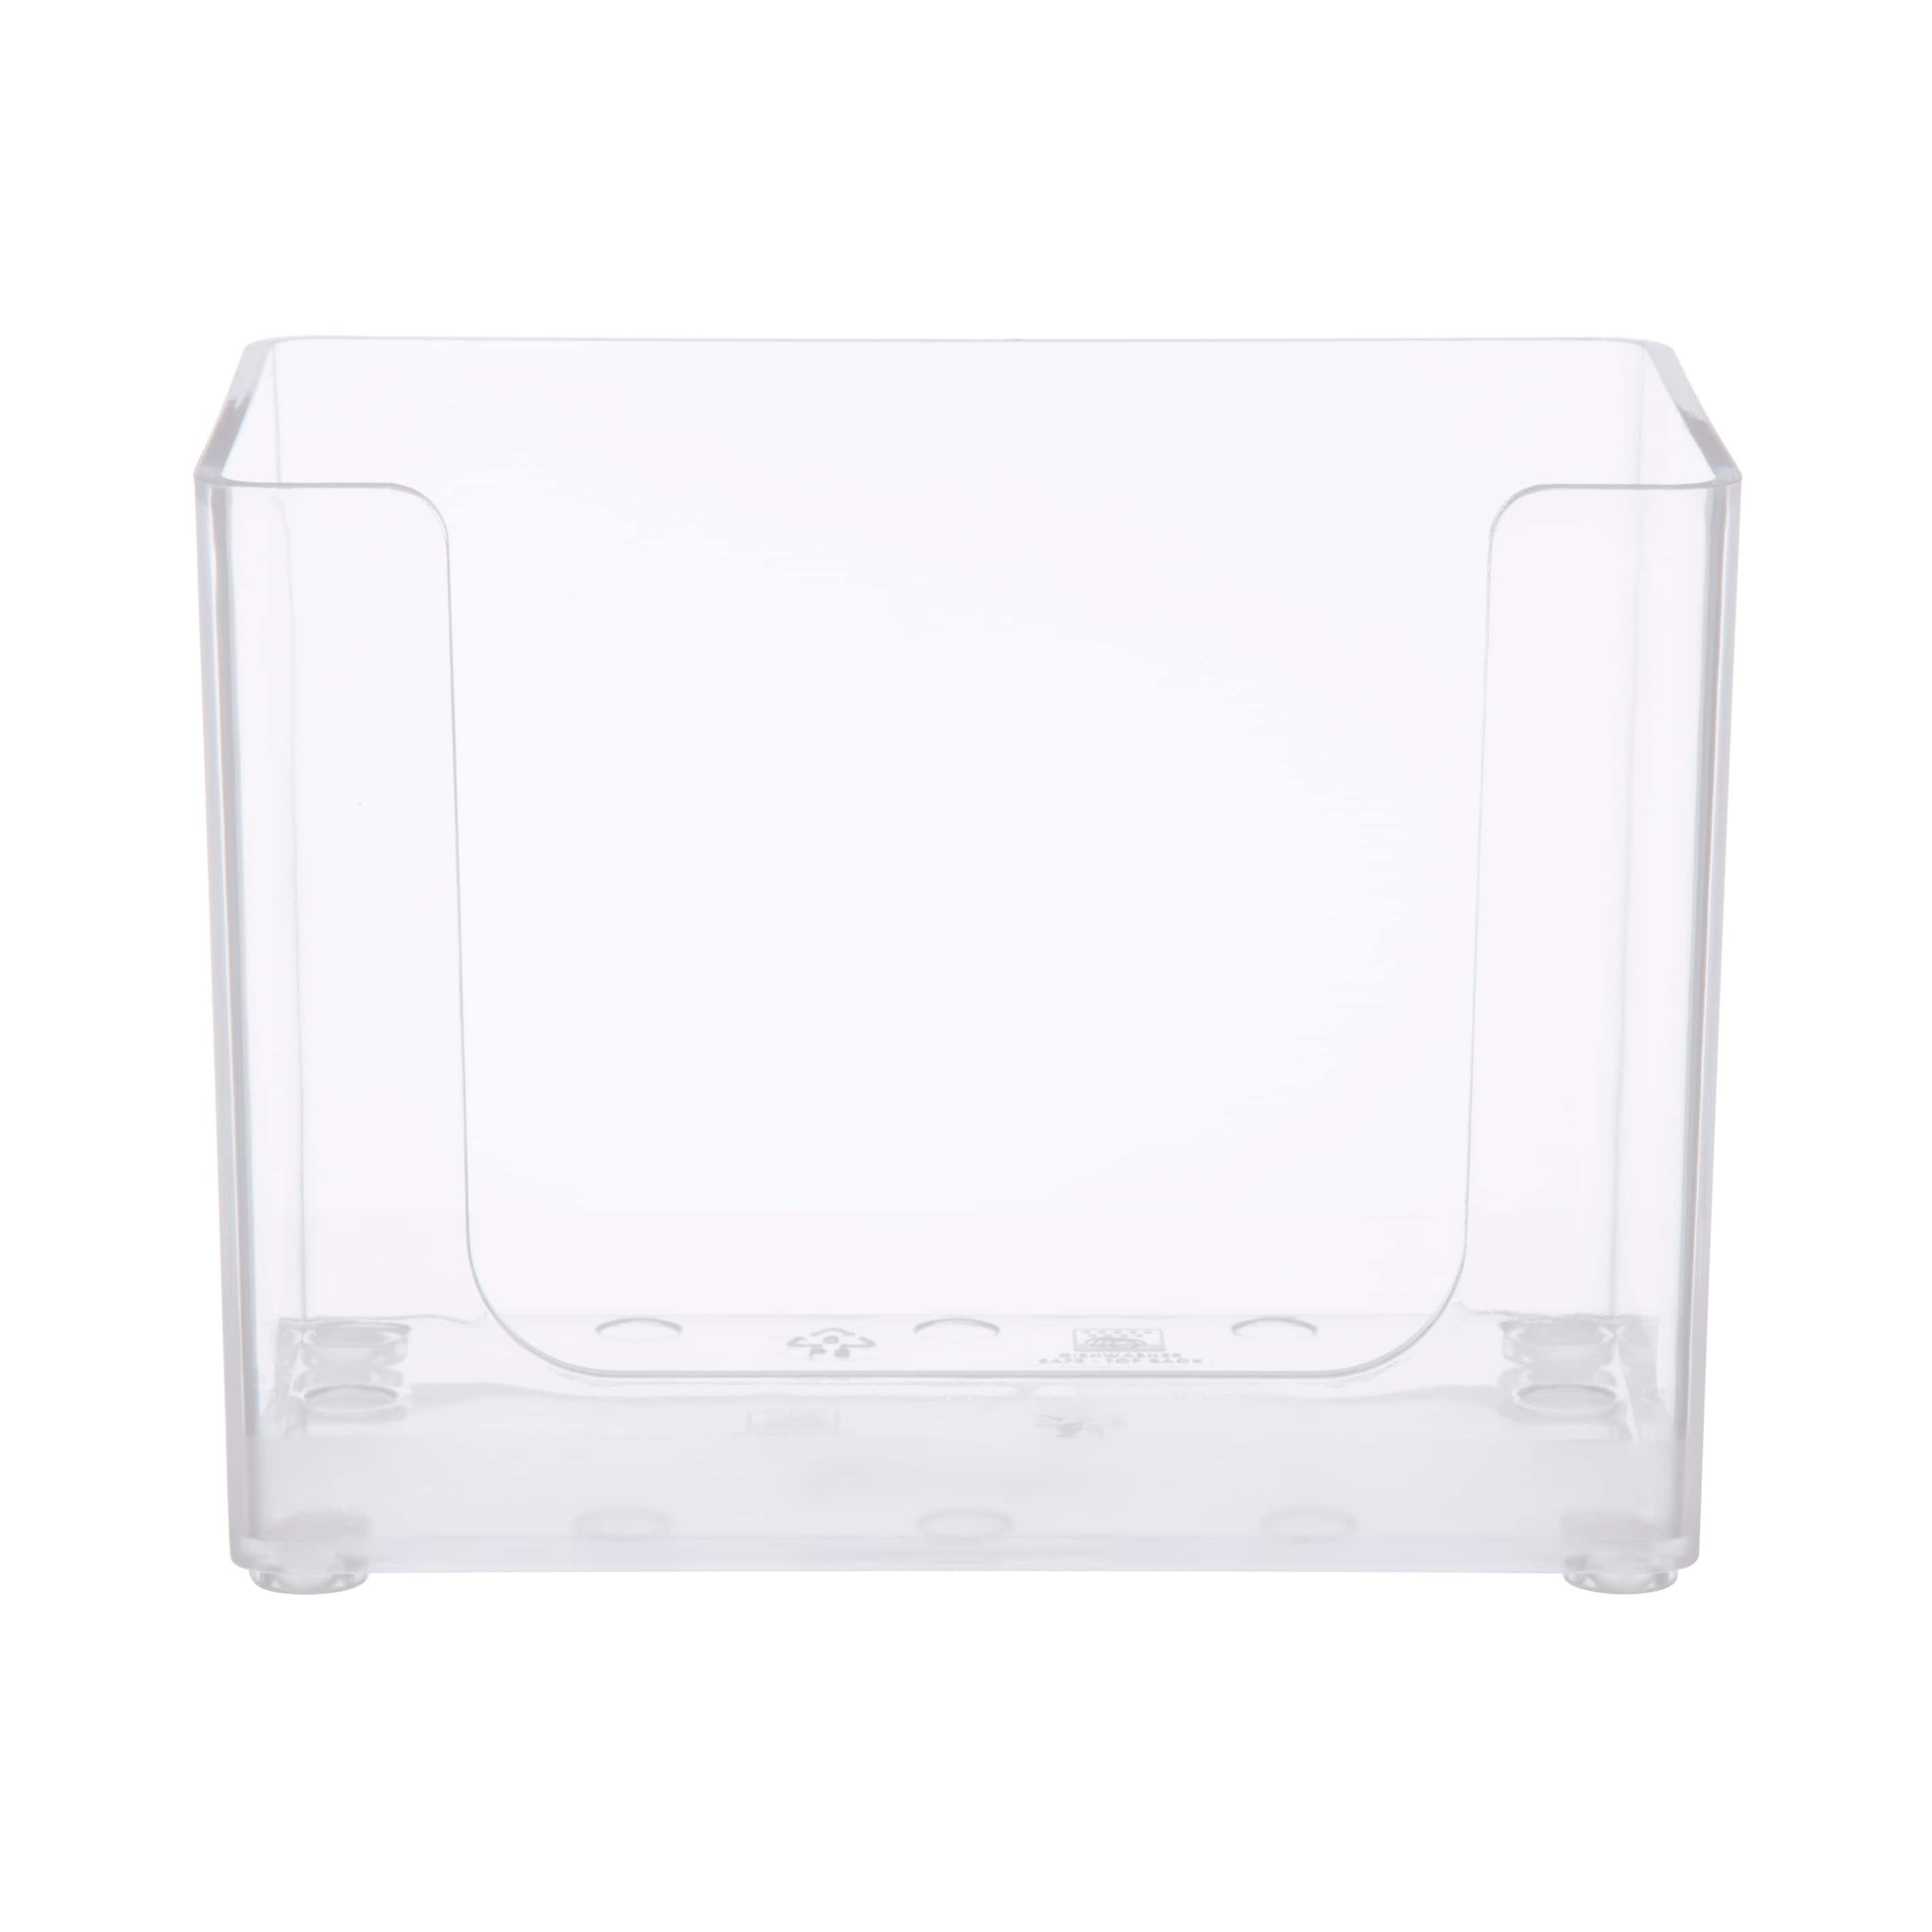 https://ak1.ostkcdn.com/images/products/is/images/direct/ced374d8160dd44f90e58493c4d425d0fca47950/Kenney-Storage-Made-Simple-Drawer-Organizer-Bin%2C-Set-of-2%2C-Clear.jpg